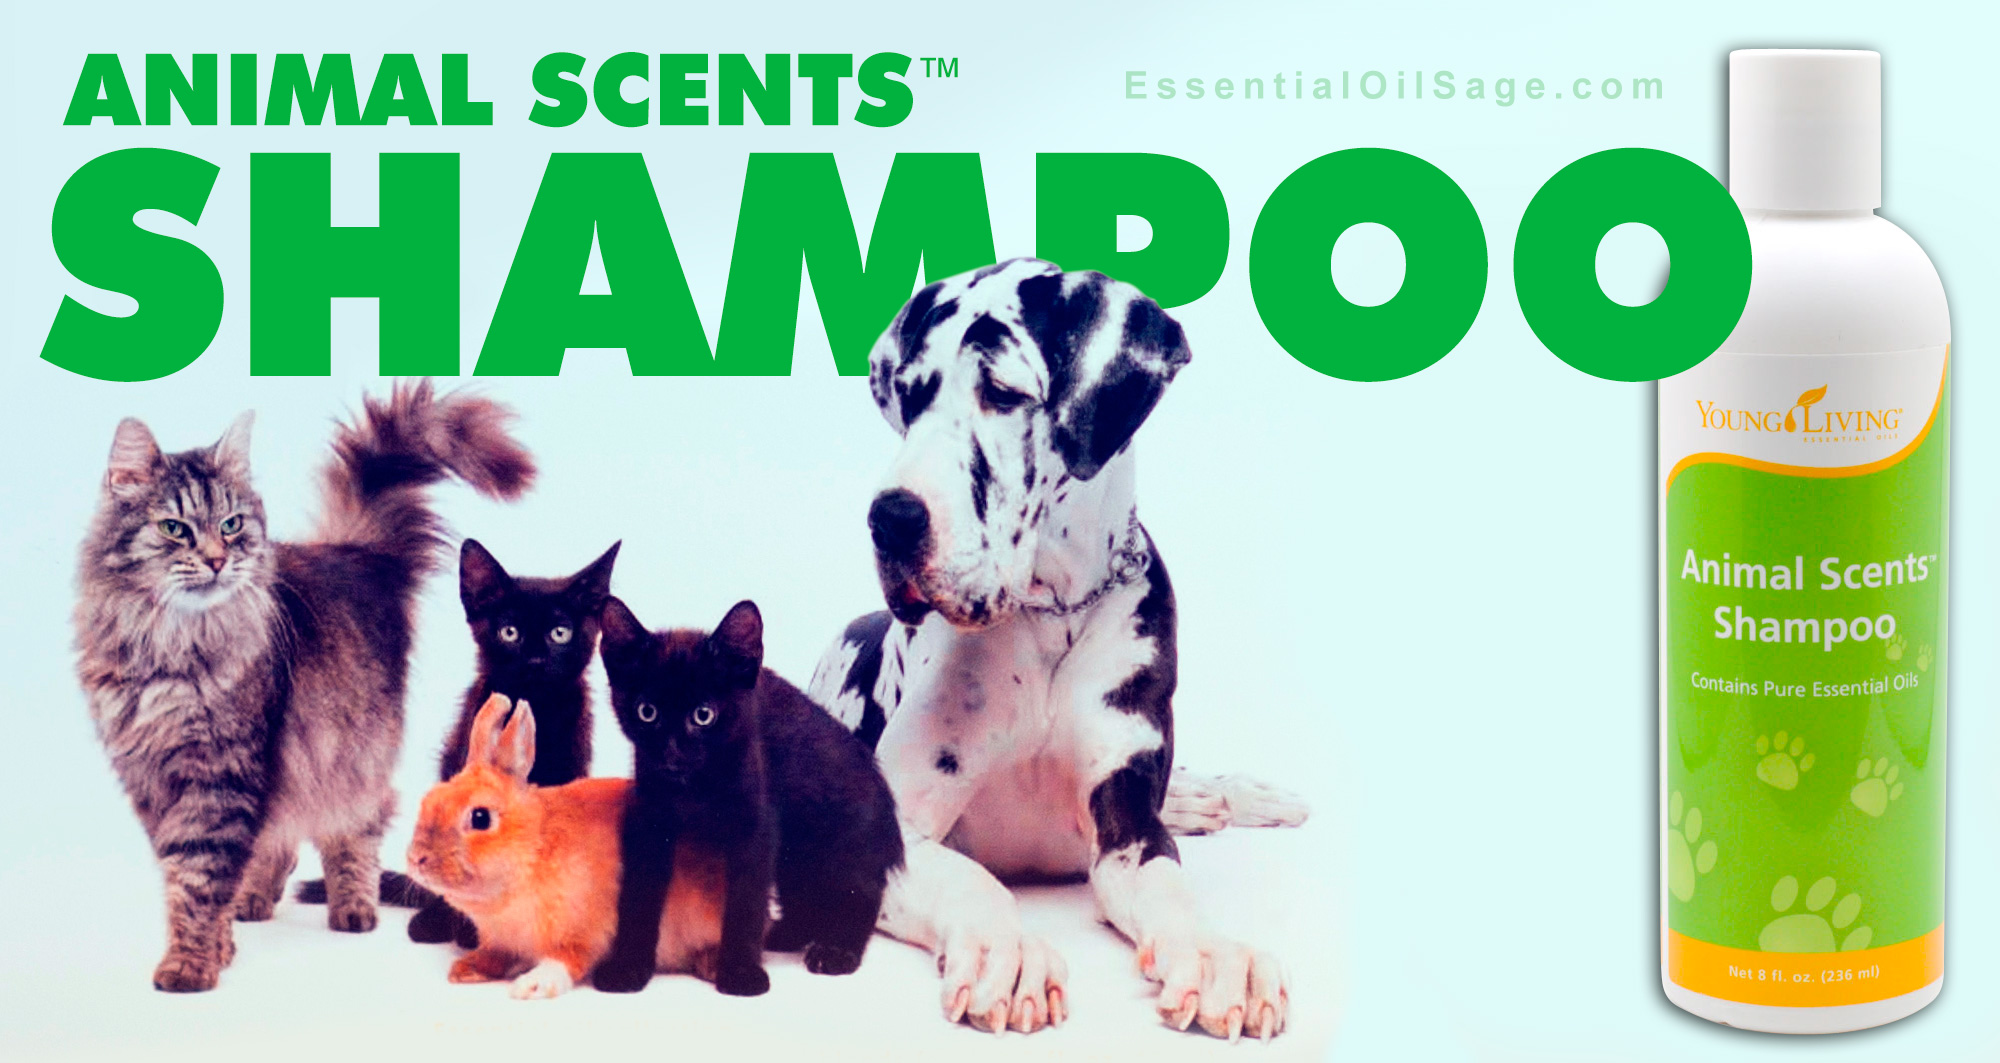 Young Living Animal Scents Shampoo